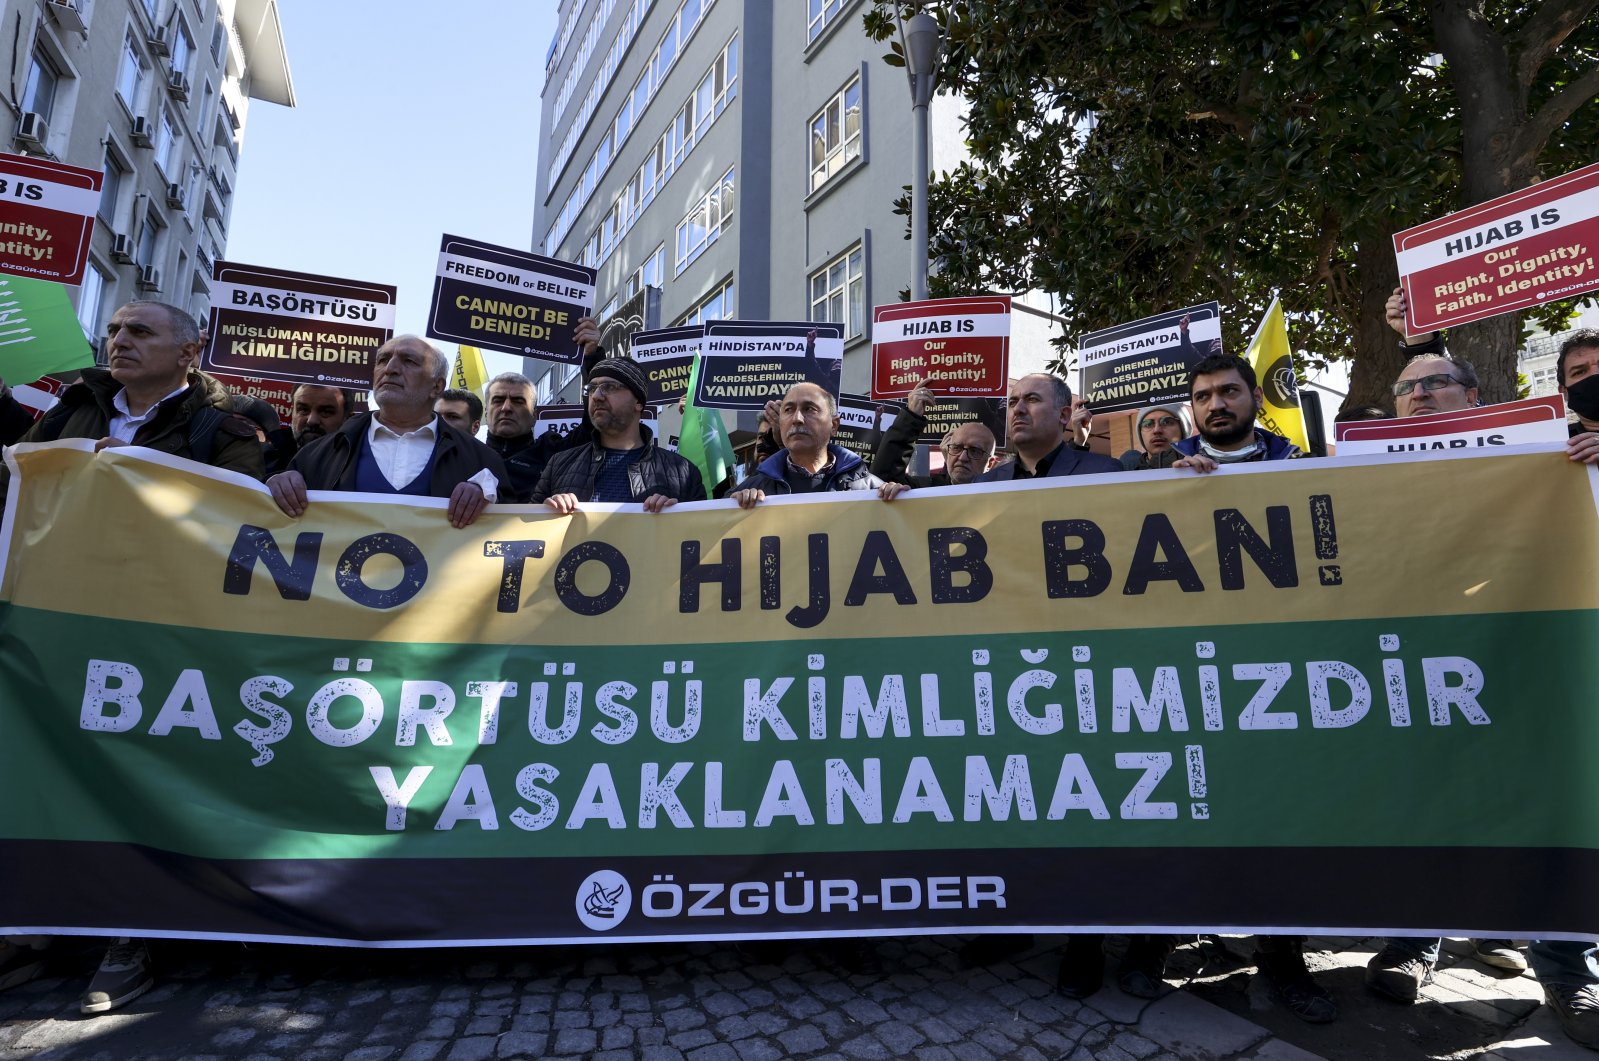 The Özgürder and Mazlumder associations protested the hijab ban in Indian schools, Istanbul, Turkey, Feb. 19, 2021. (AA Photo)